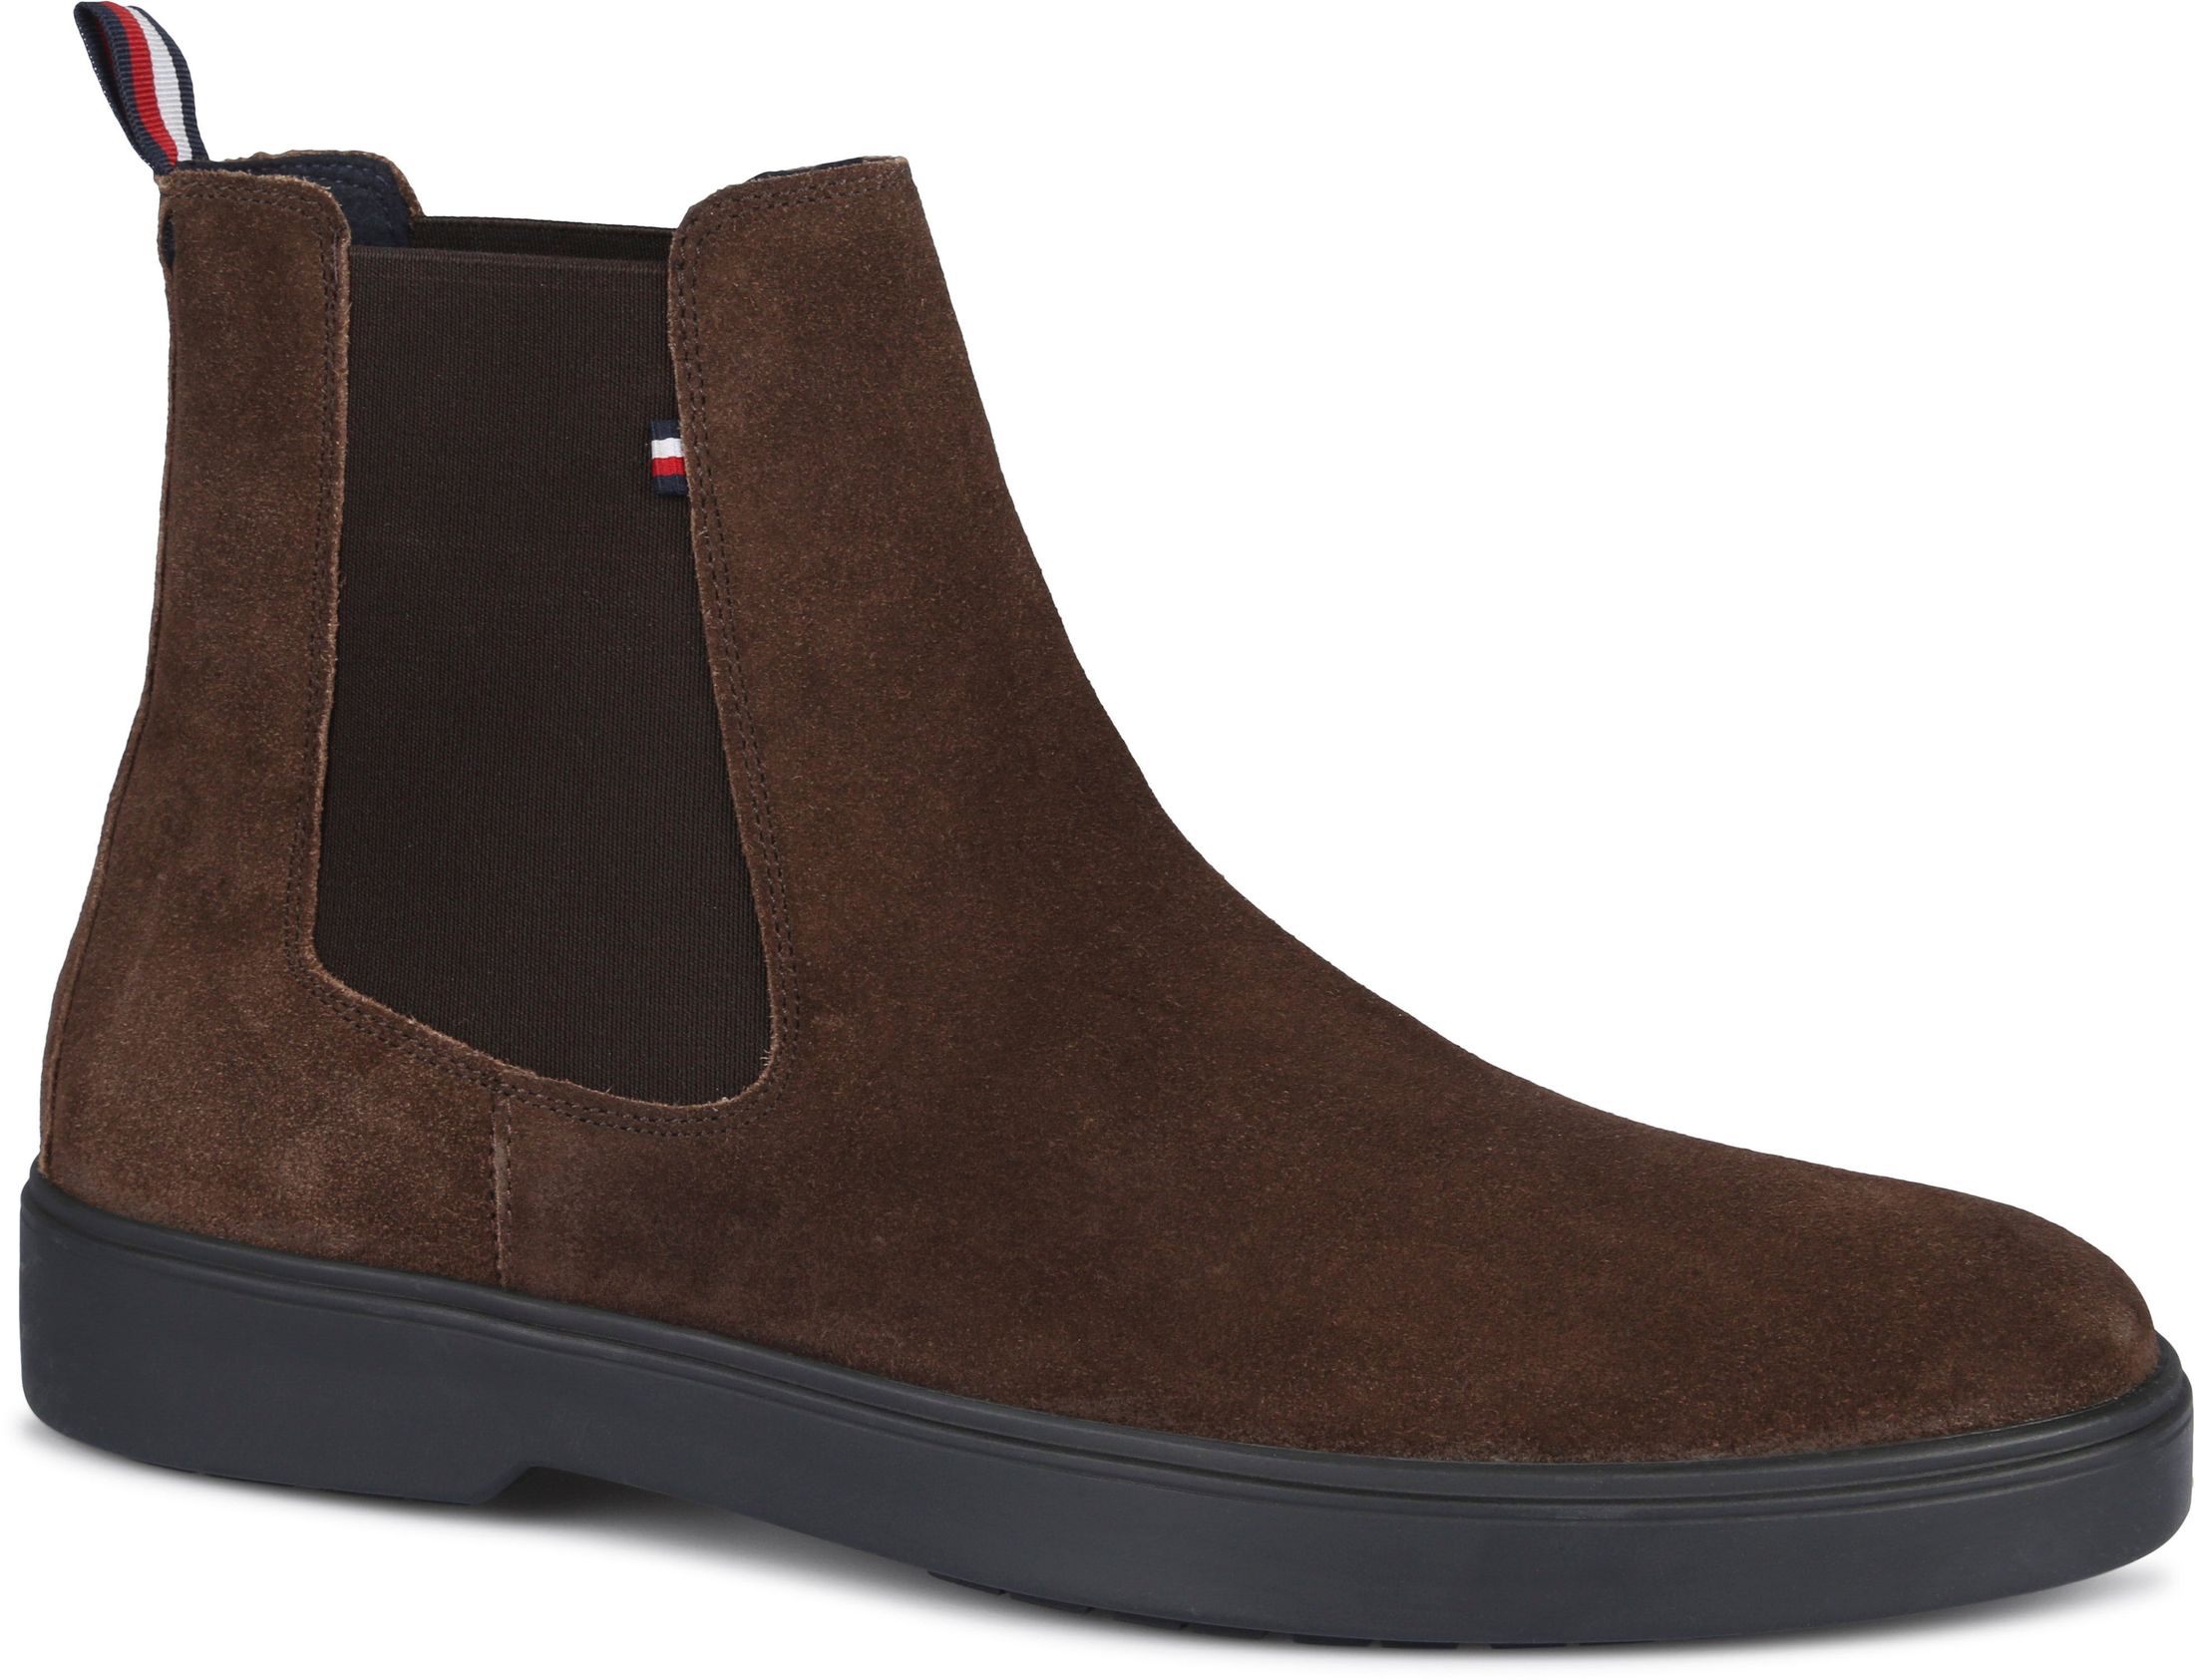 Tommy Hilfiger Chelsea Boots Brown size 10.5